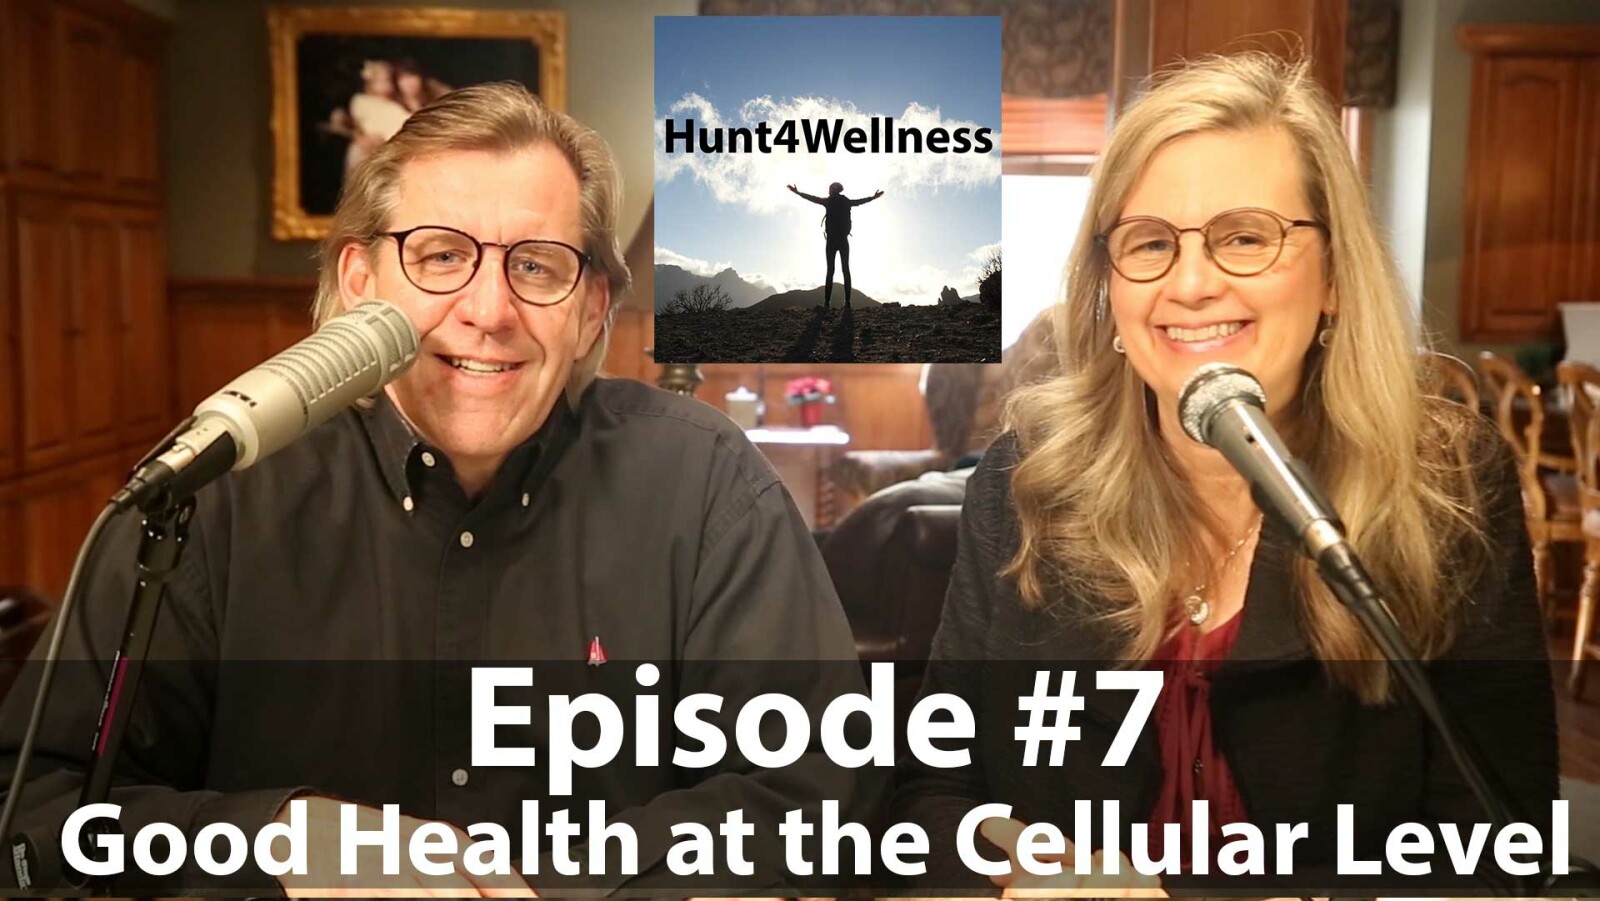 Episode #7 - Good Health at the Cellular Level